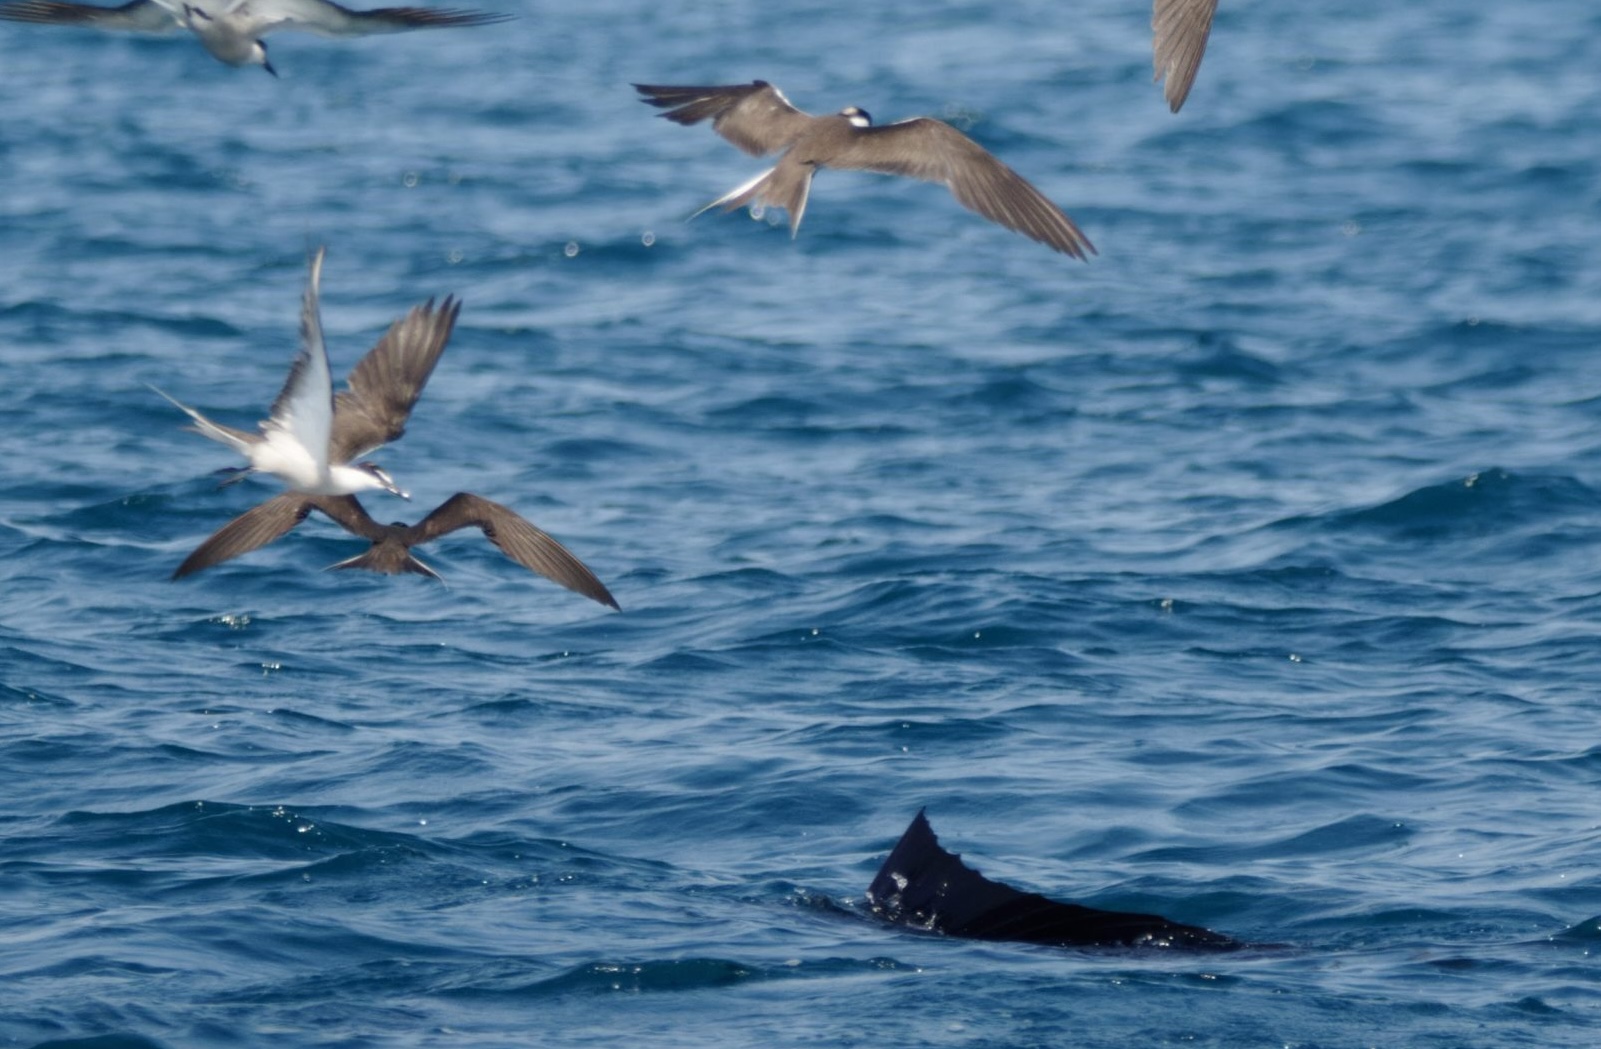 Sailfish help seabirds during joint hunts, SCIoI researchers show